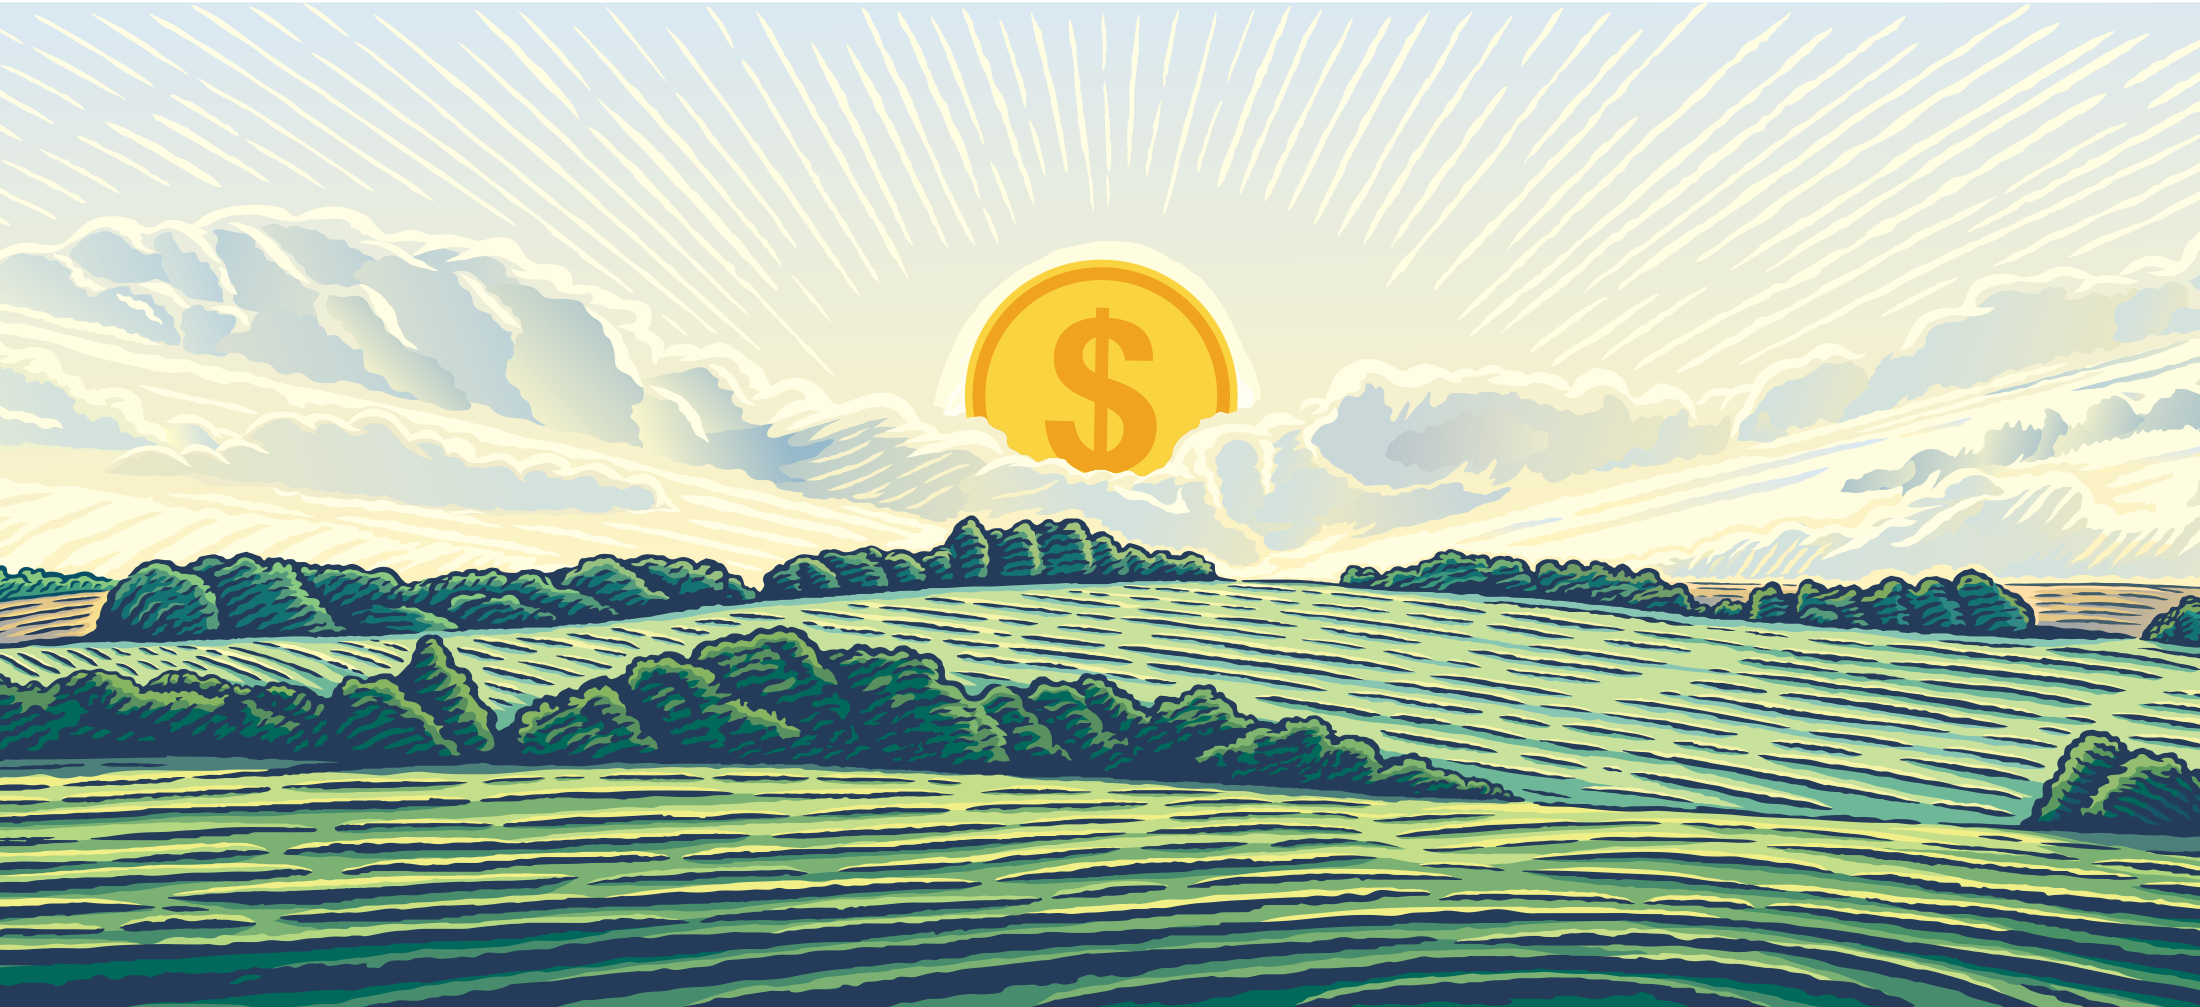 Coin rising like the sun over a rural landscape